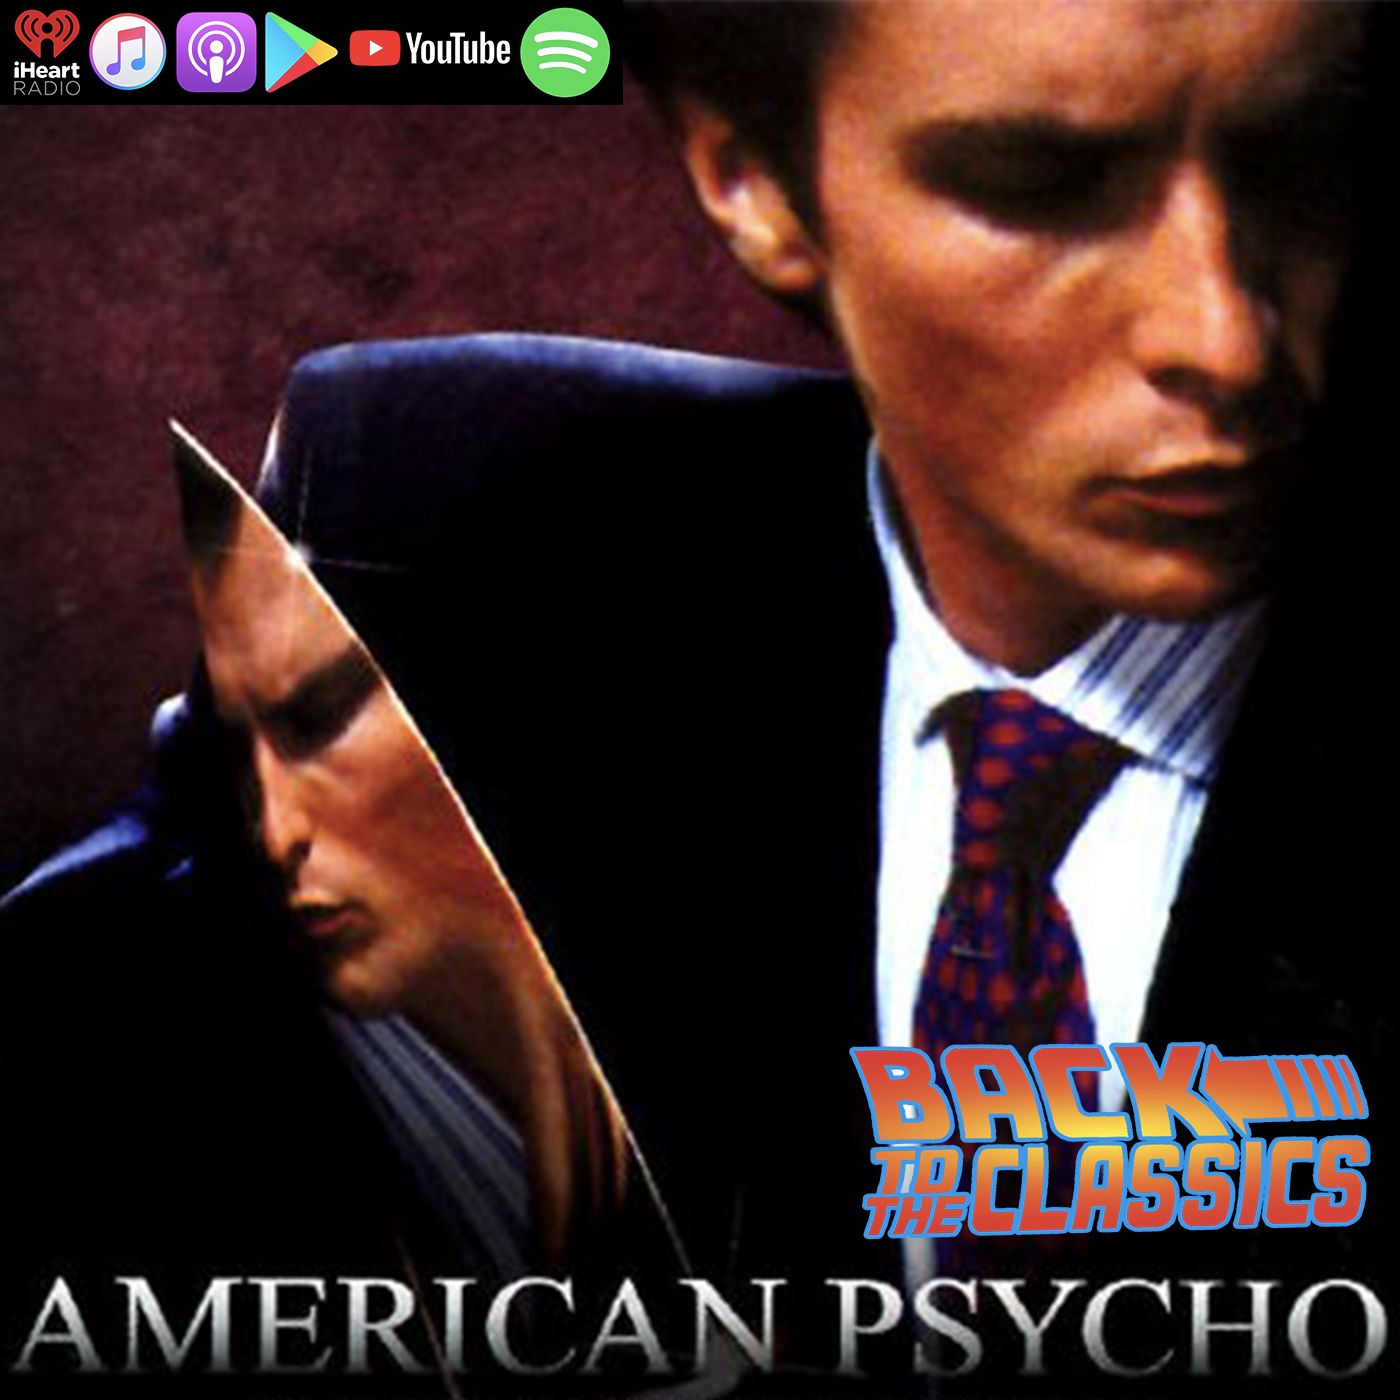 Back to American Psycho